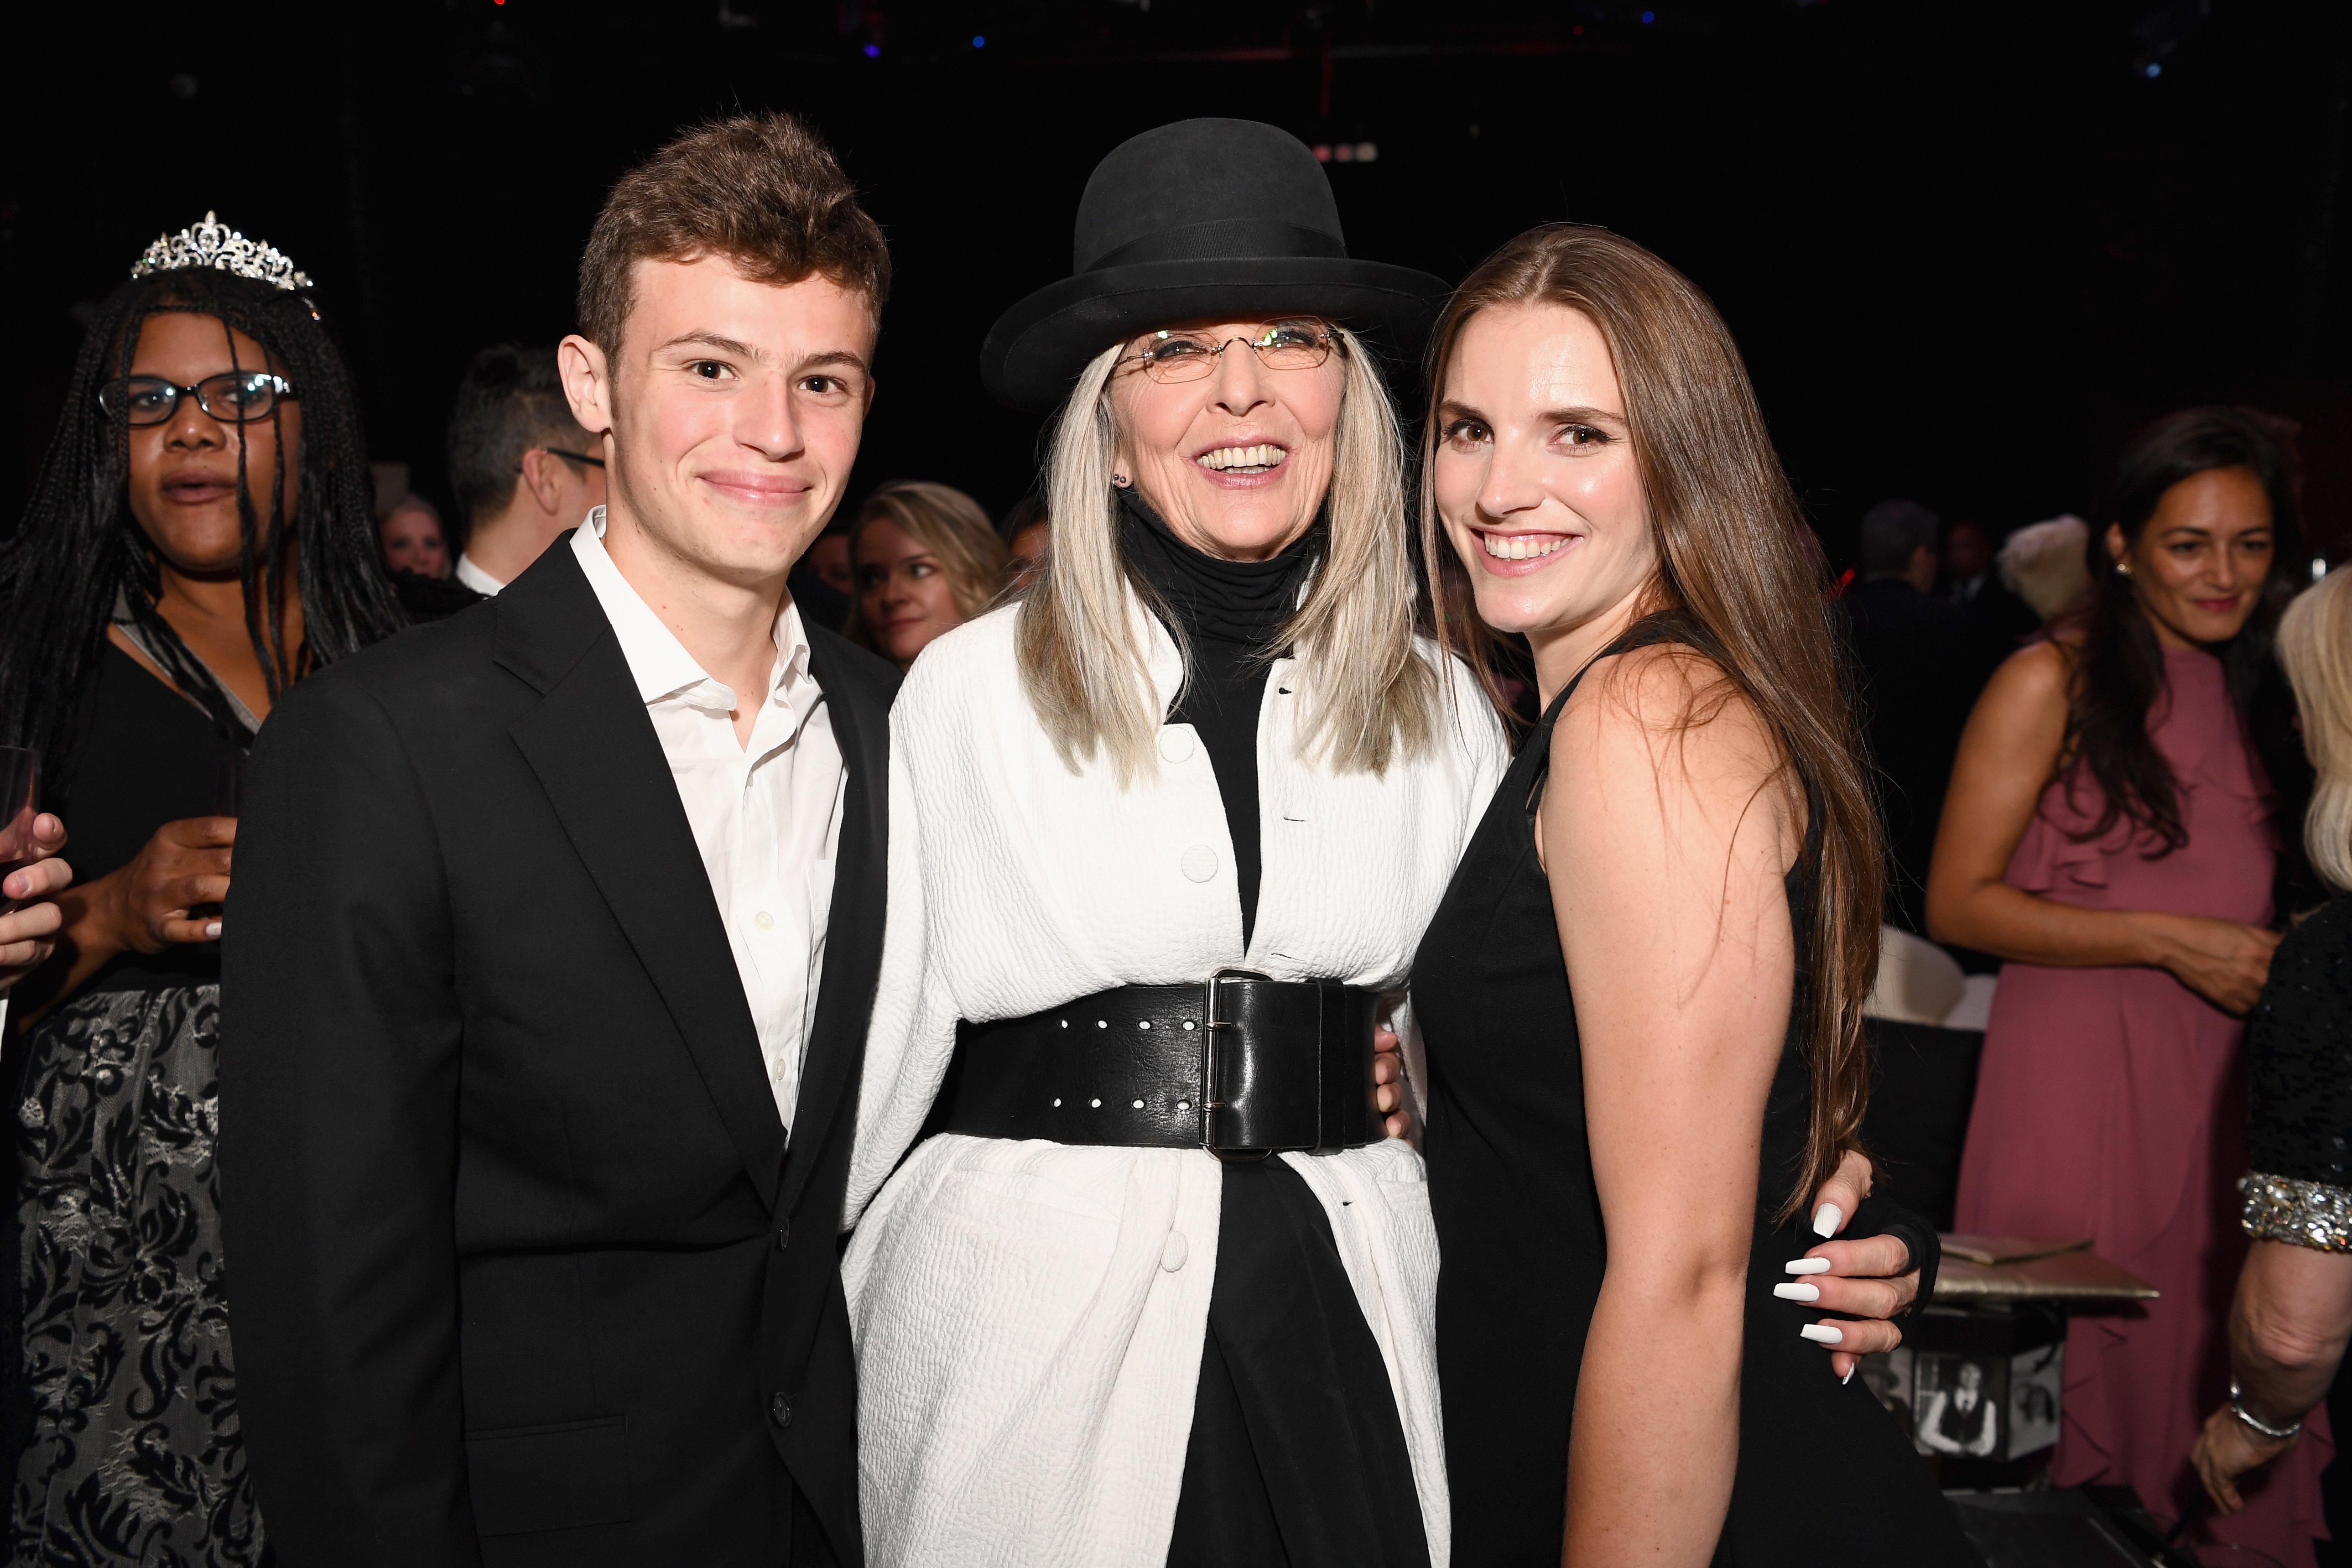 Duke Keaton, honoree Diane Keaton, and Dexter Keaton attend the after party for the American Film Institute's 45th Life Achievement Award Gala Tribute to Diane Keaton at OHM Nightclub on June 8, 2017, in Hollywood, California. | Source: Getty Images